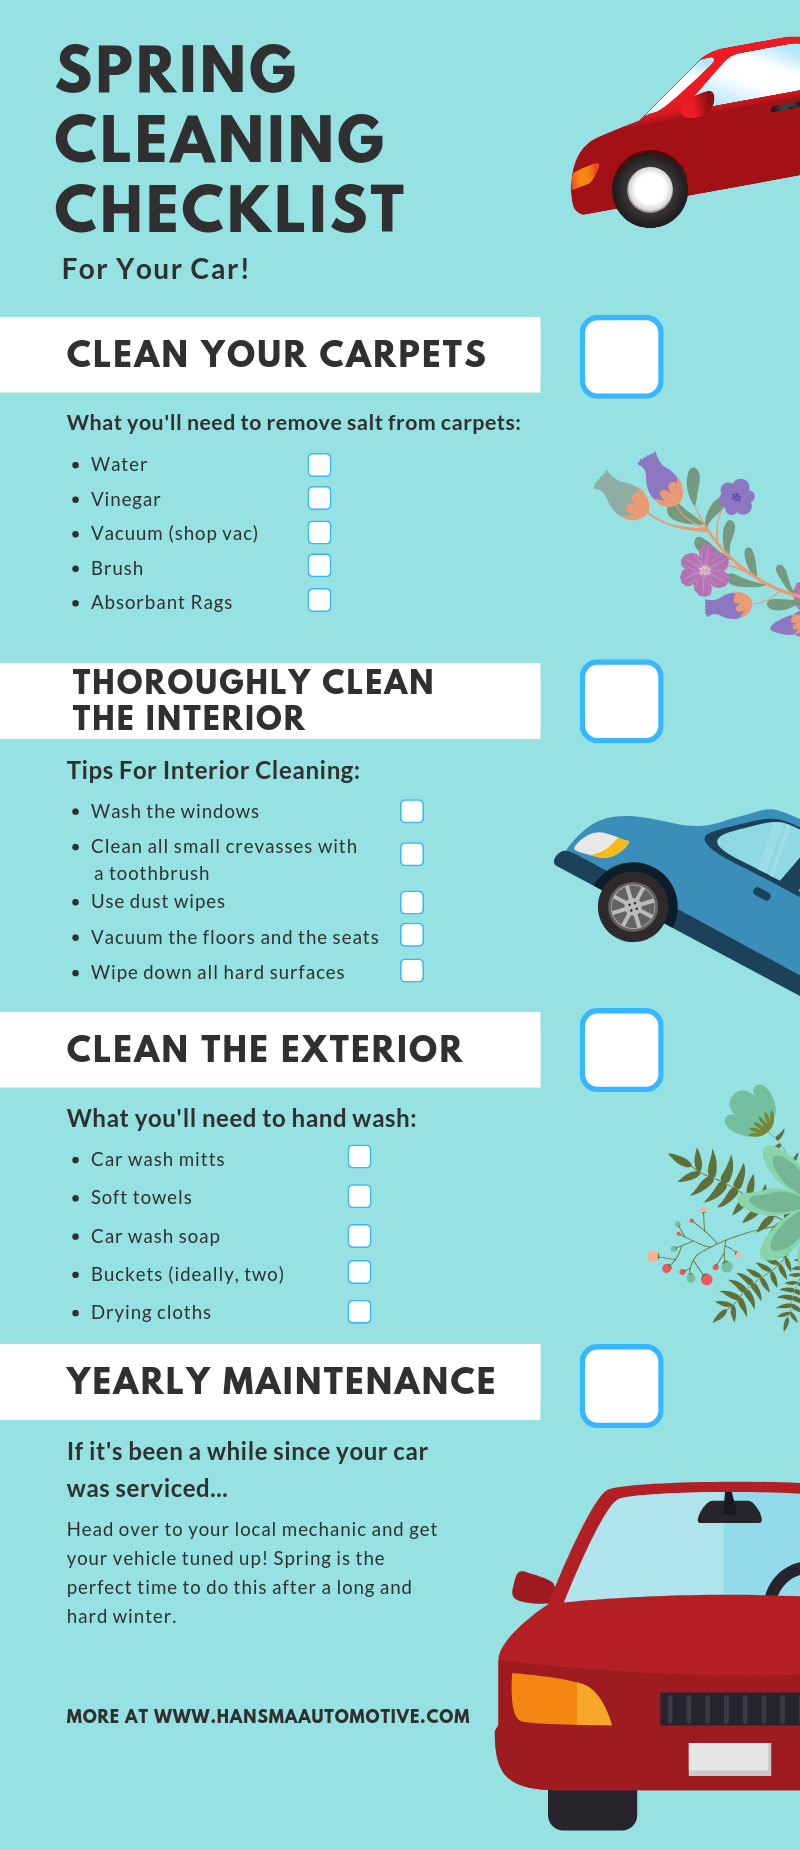 Spring Cleaning Checklist For Your Car - FREE Downloadable PDF  Regarding Auto Detailing Checklist Template In Auto Detailing Checklist Template